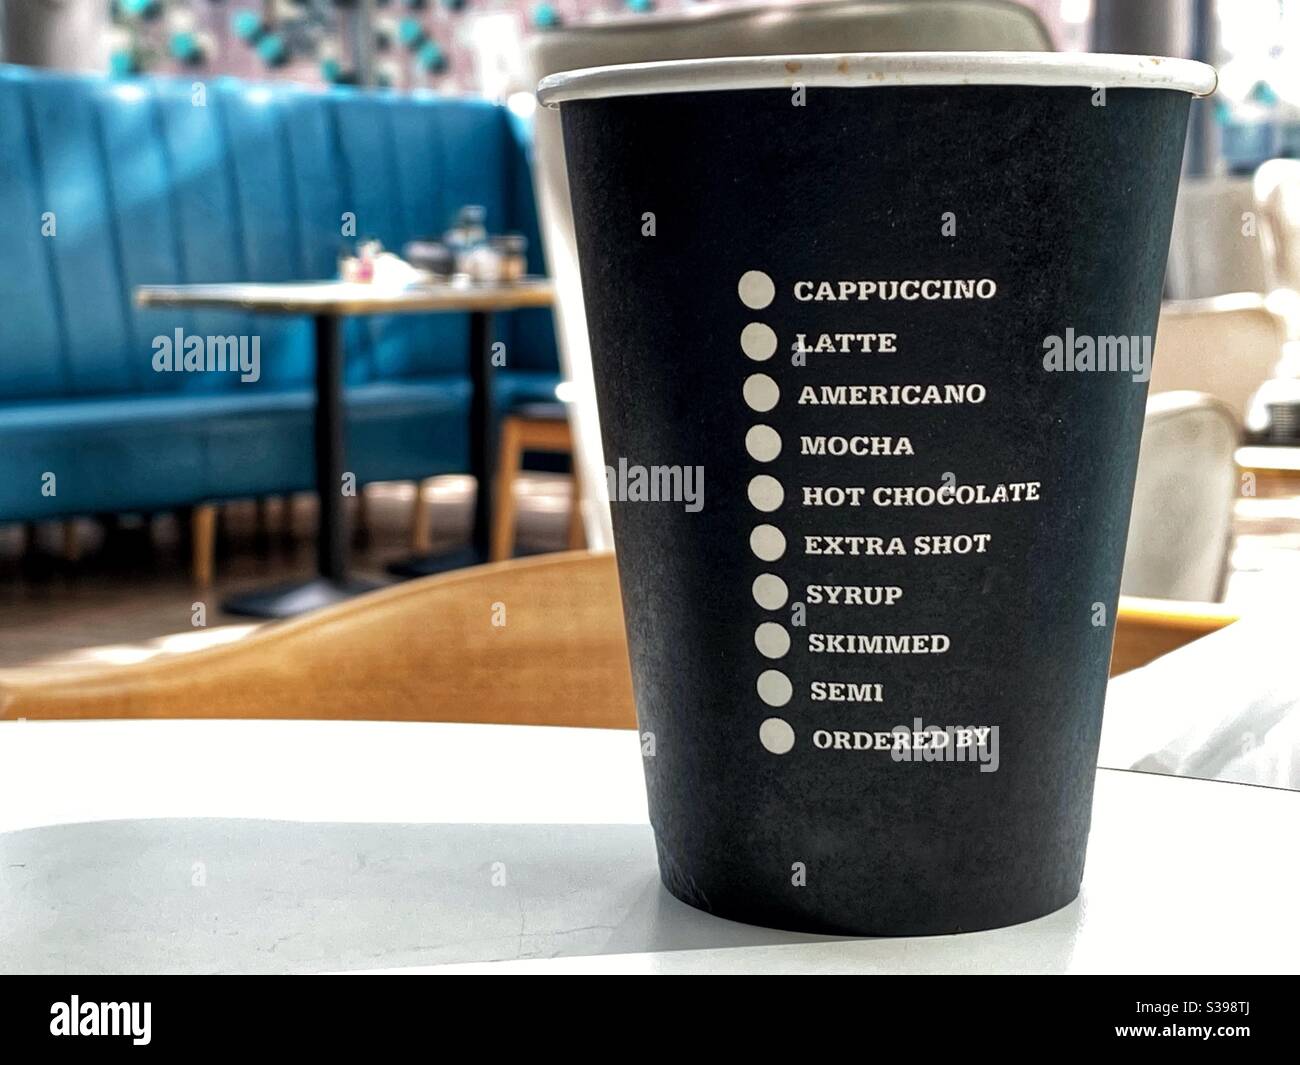 Disposable coffee cup on a table with list of coffees and options. No people. Stock Photo